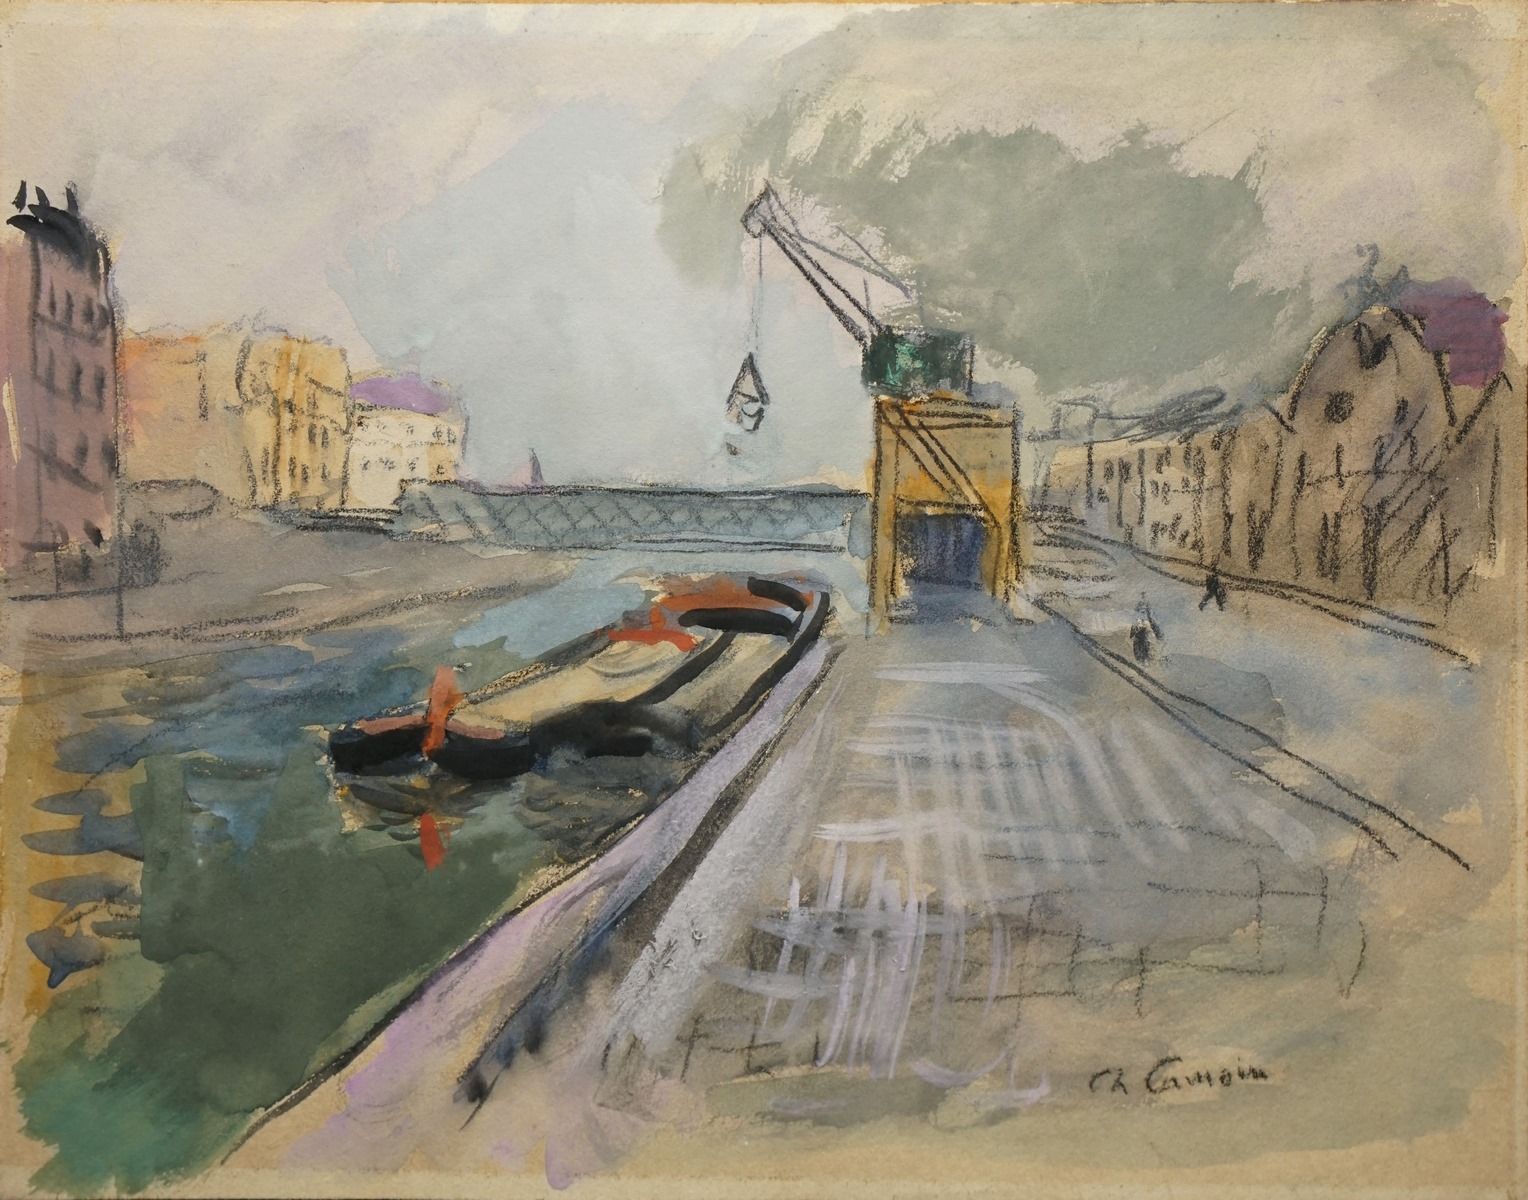 Null CAMOIN Charles, 1879-1965
Barge at the quay
black pencil and gouache on pap&hellip;